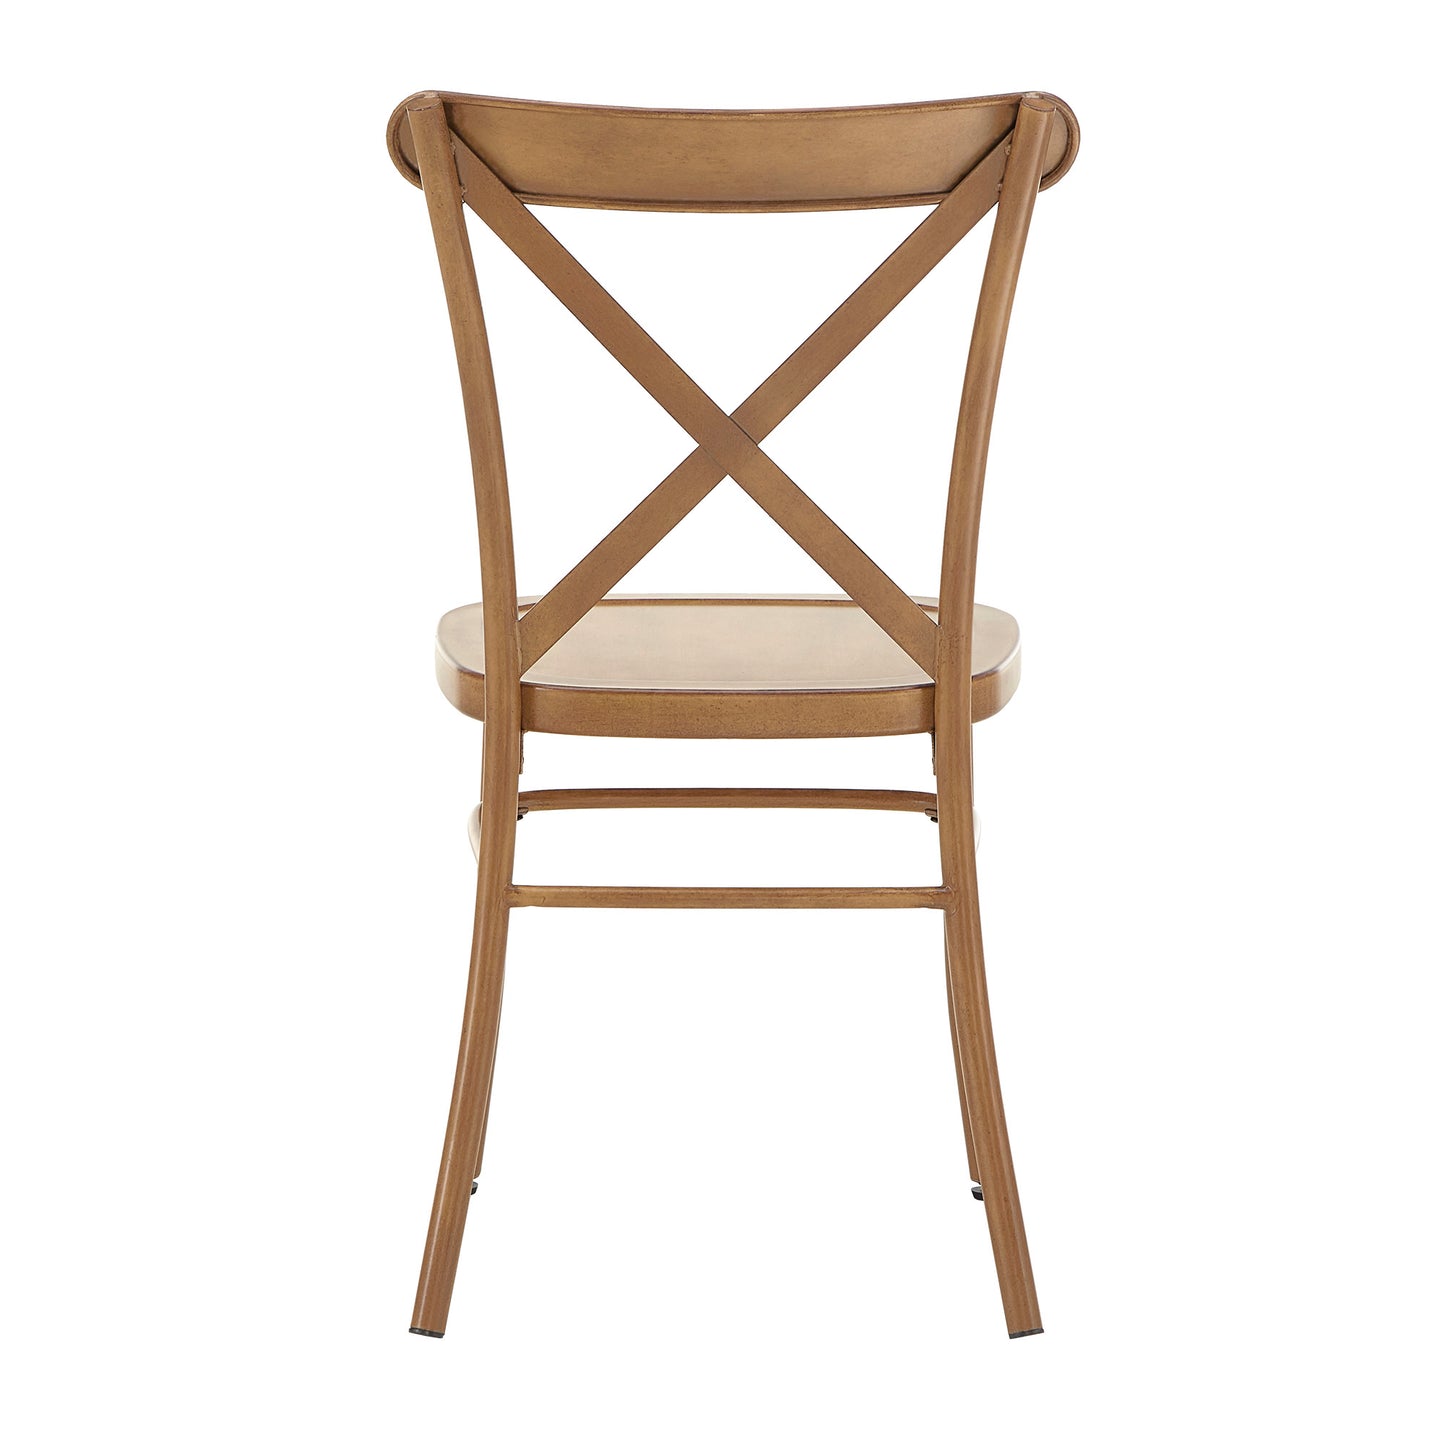 Metal Dining Chairs (Set of 2) - Oak Finish